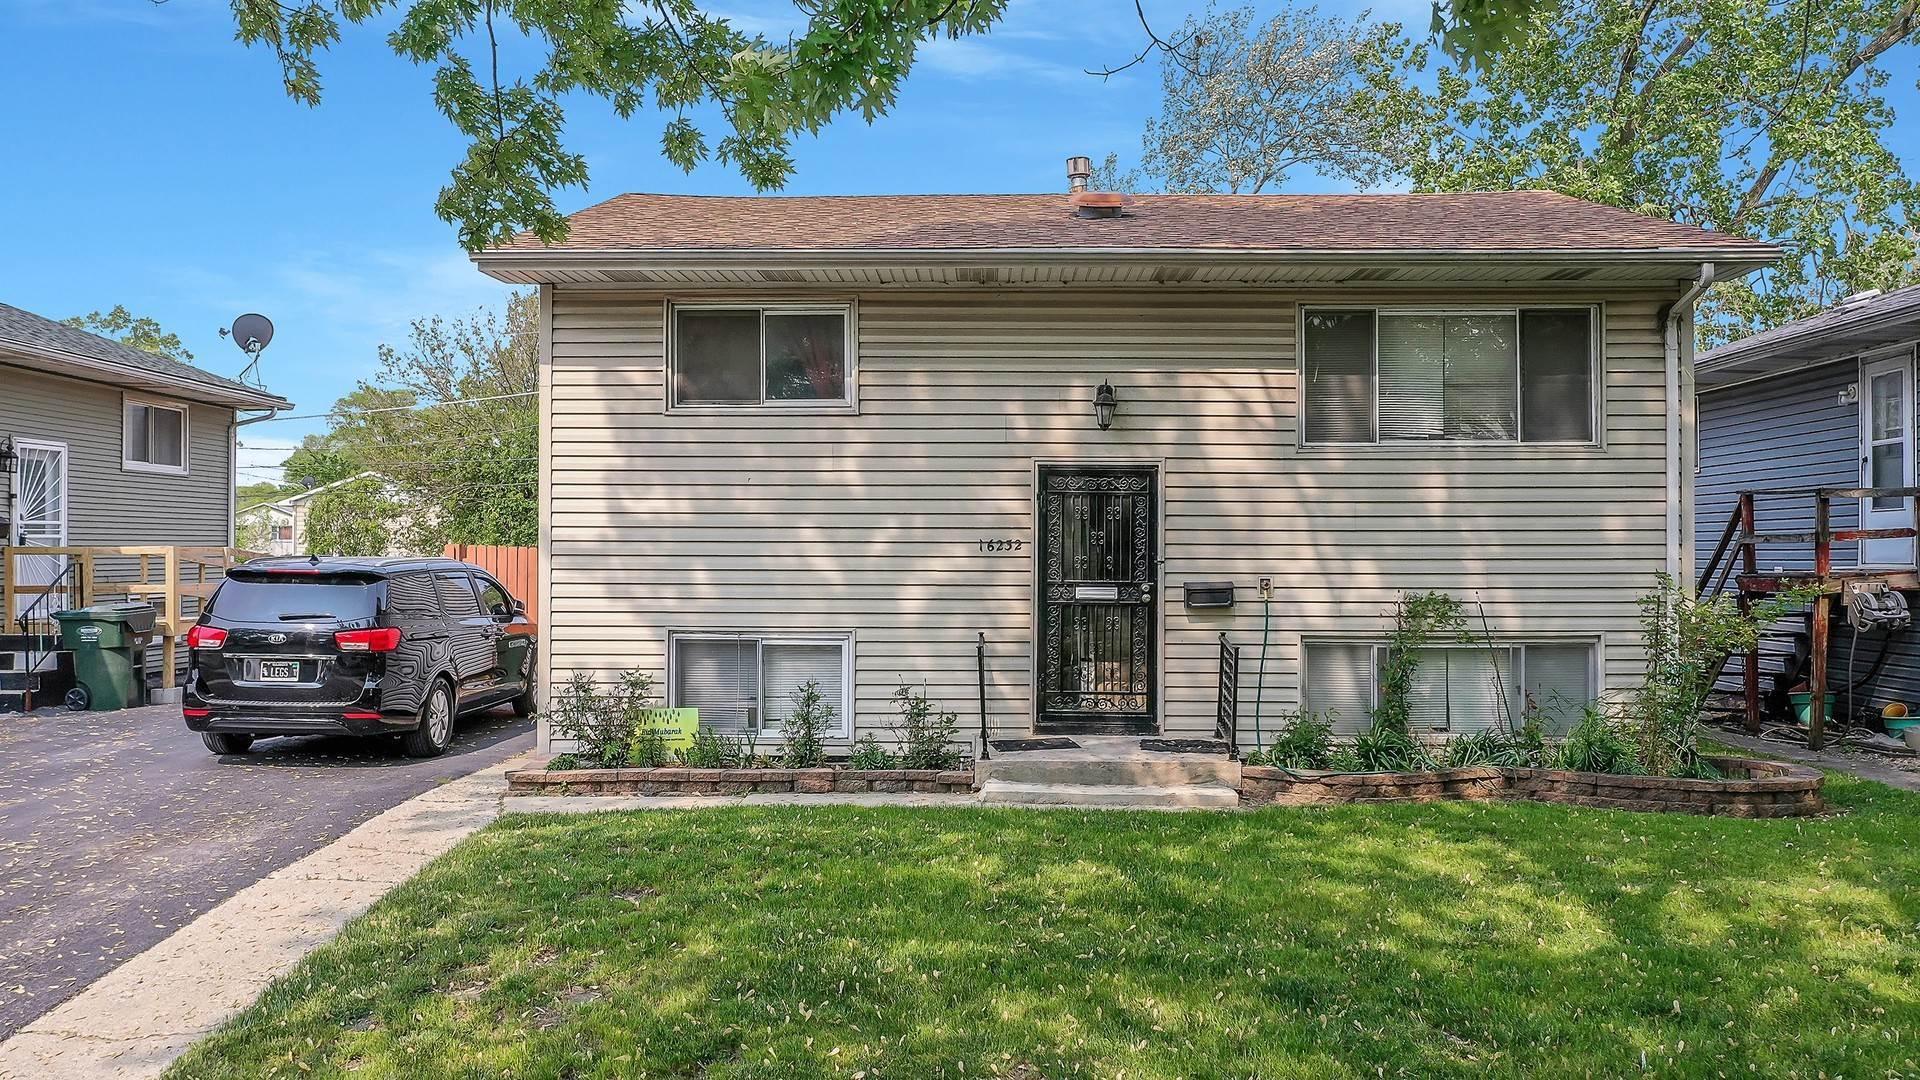 Single Family for Sale at Markham, IL 60428